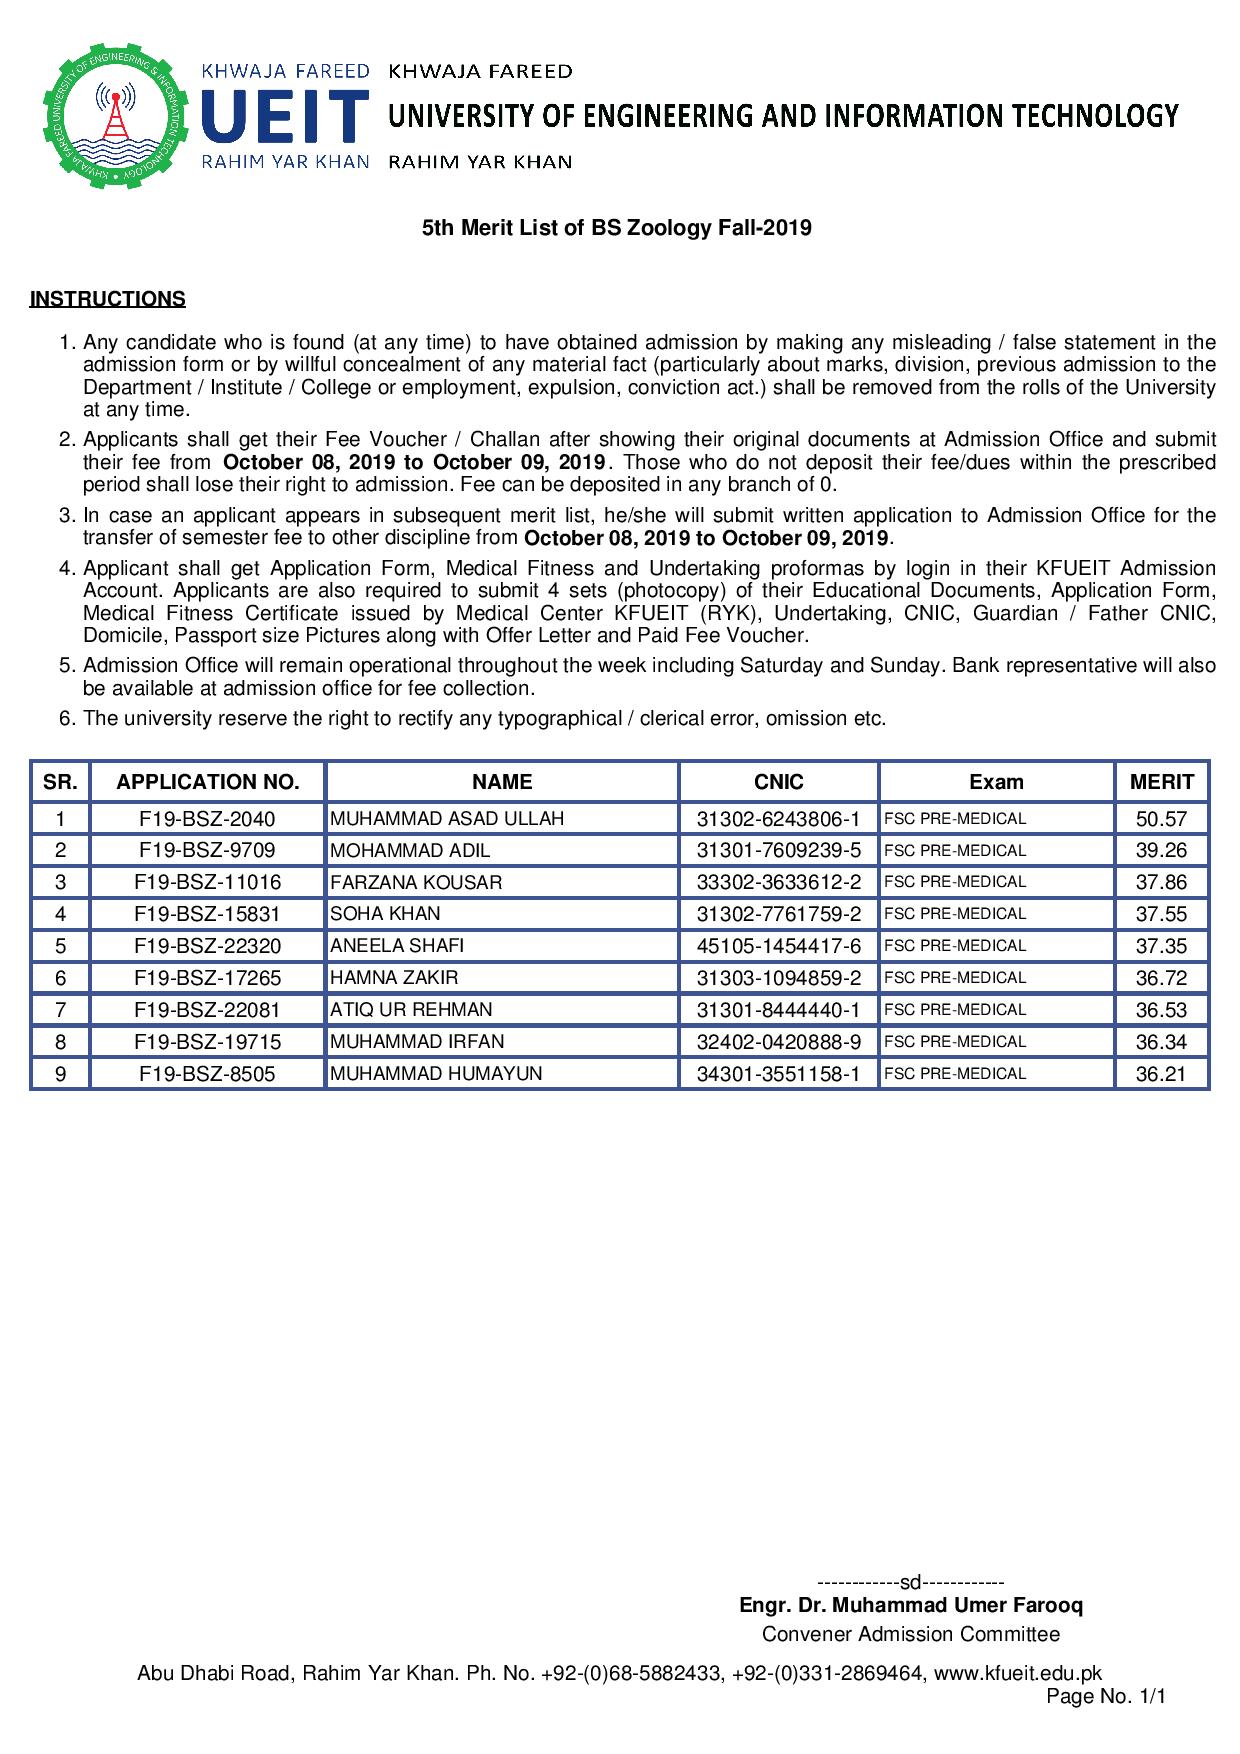 5th Merit List of BS Zoology Fall-2019-page-001